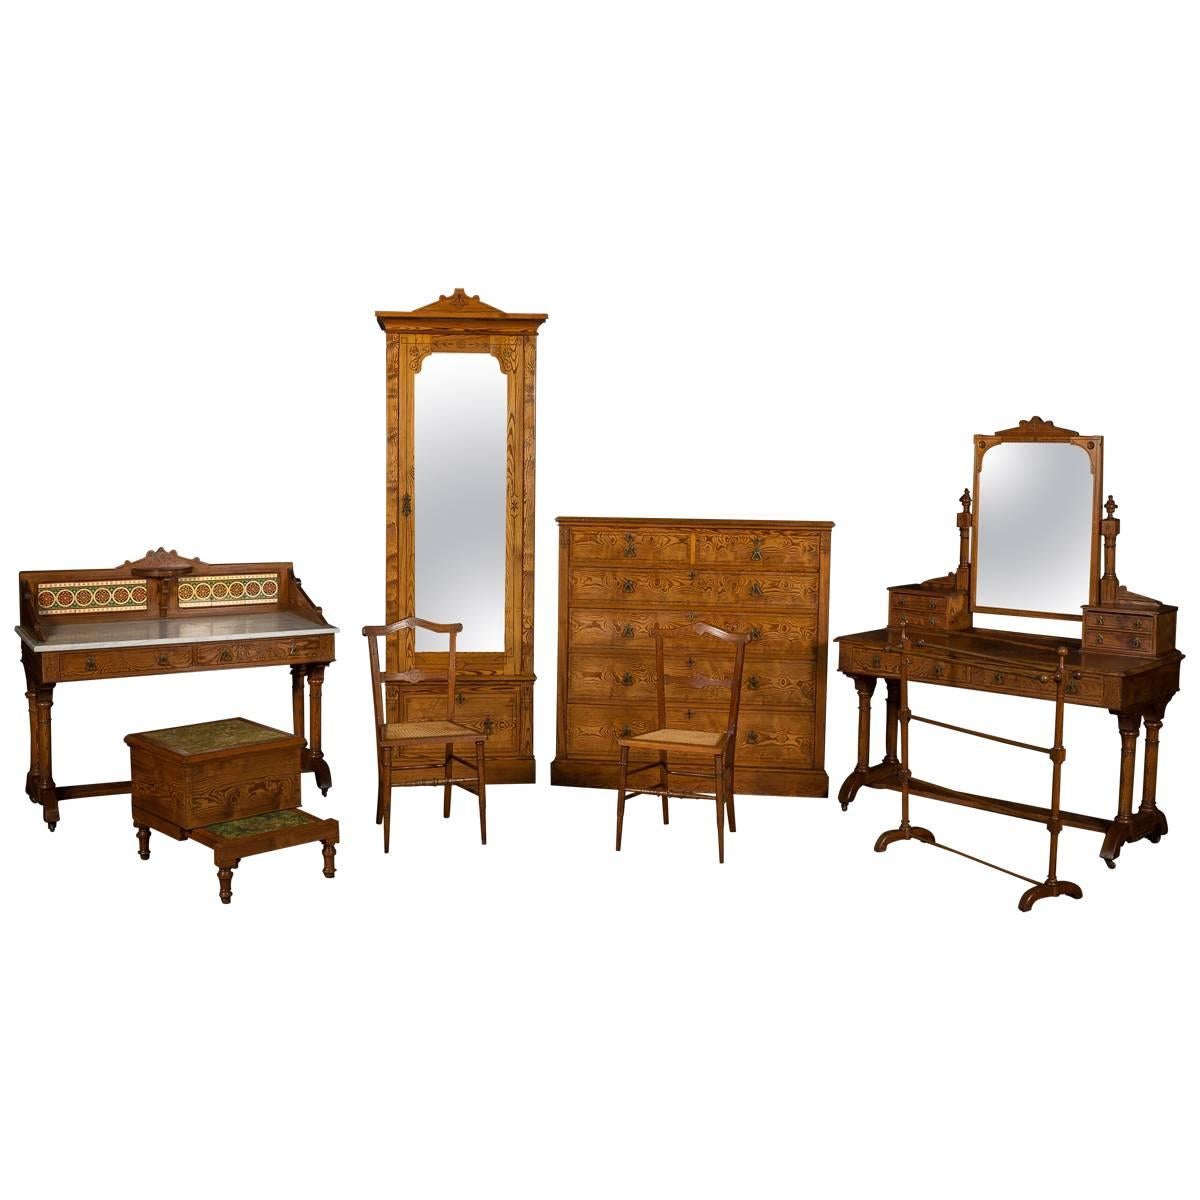 19th Century Aesthetic Movement Pitch Pine Seven-Piece Bedroom Suite For Sale